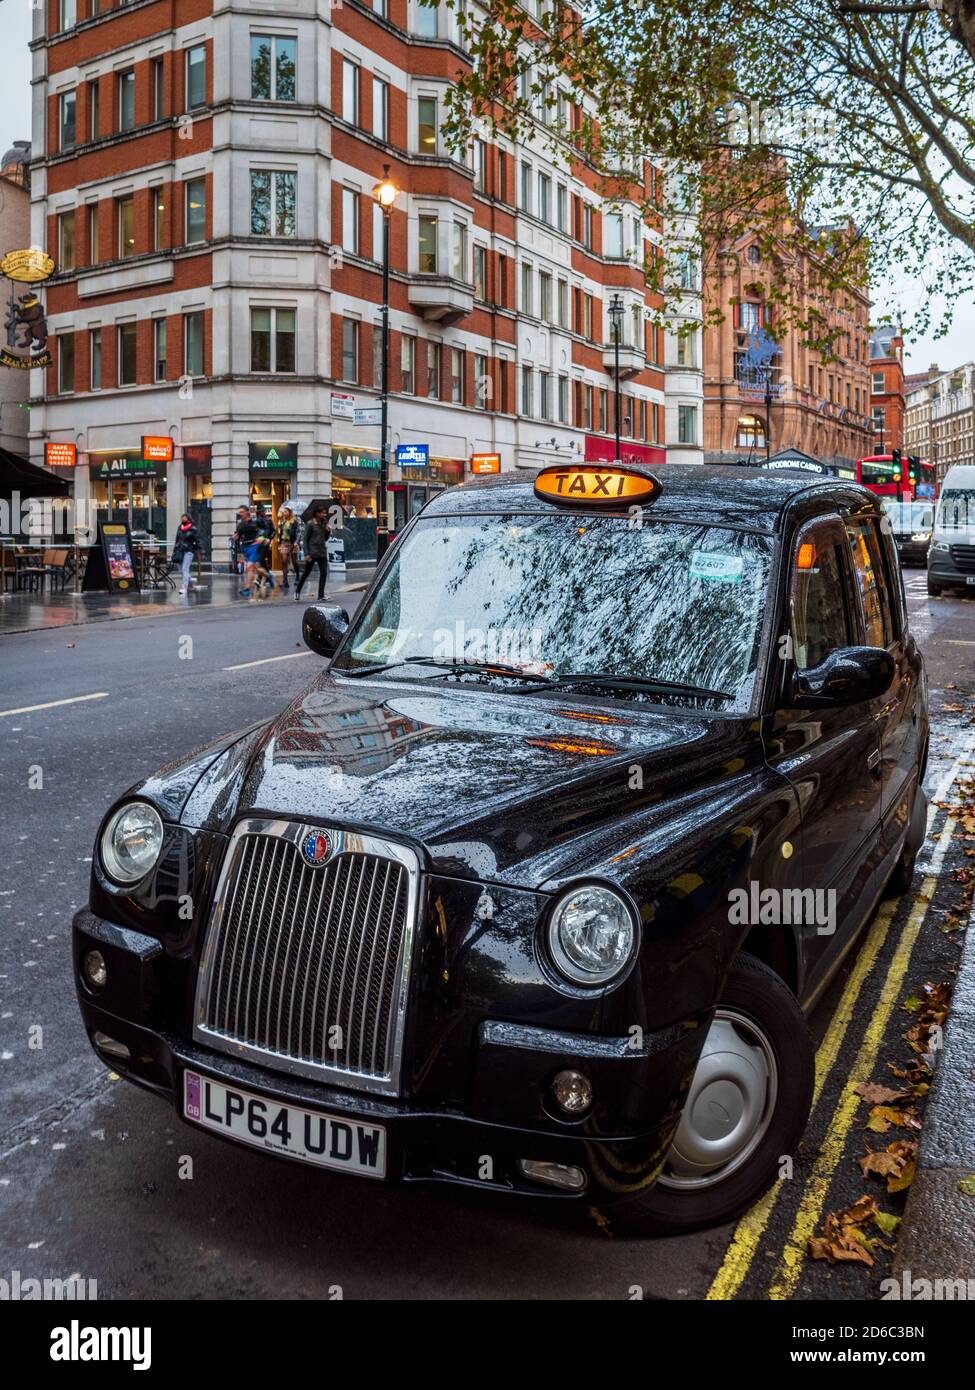 London Taxi waiting for customers, with for hire signs on. London Black Cab waiting for passengers. Stock Photo